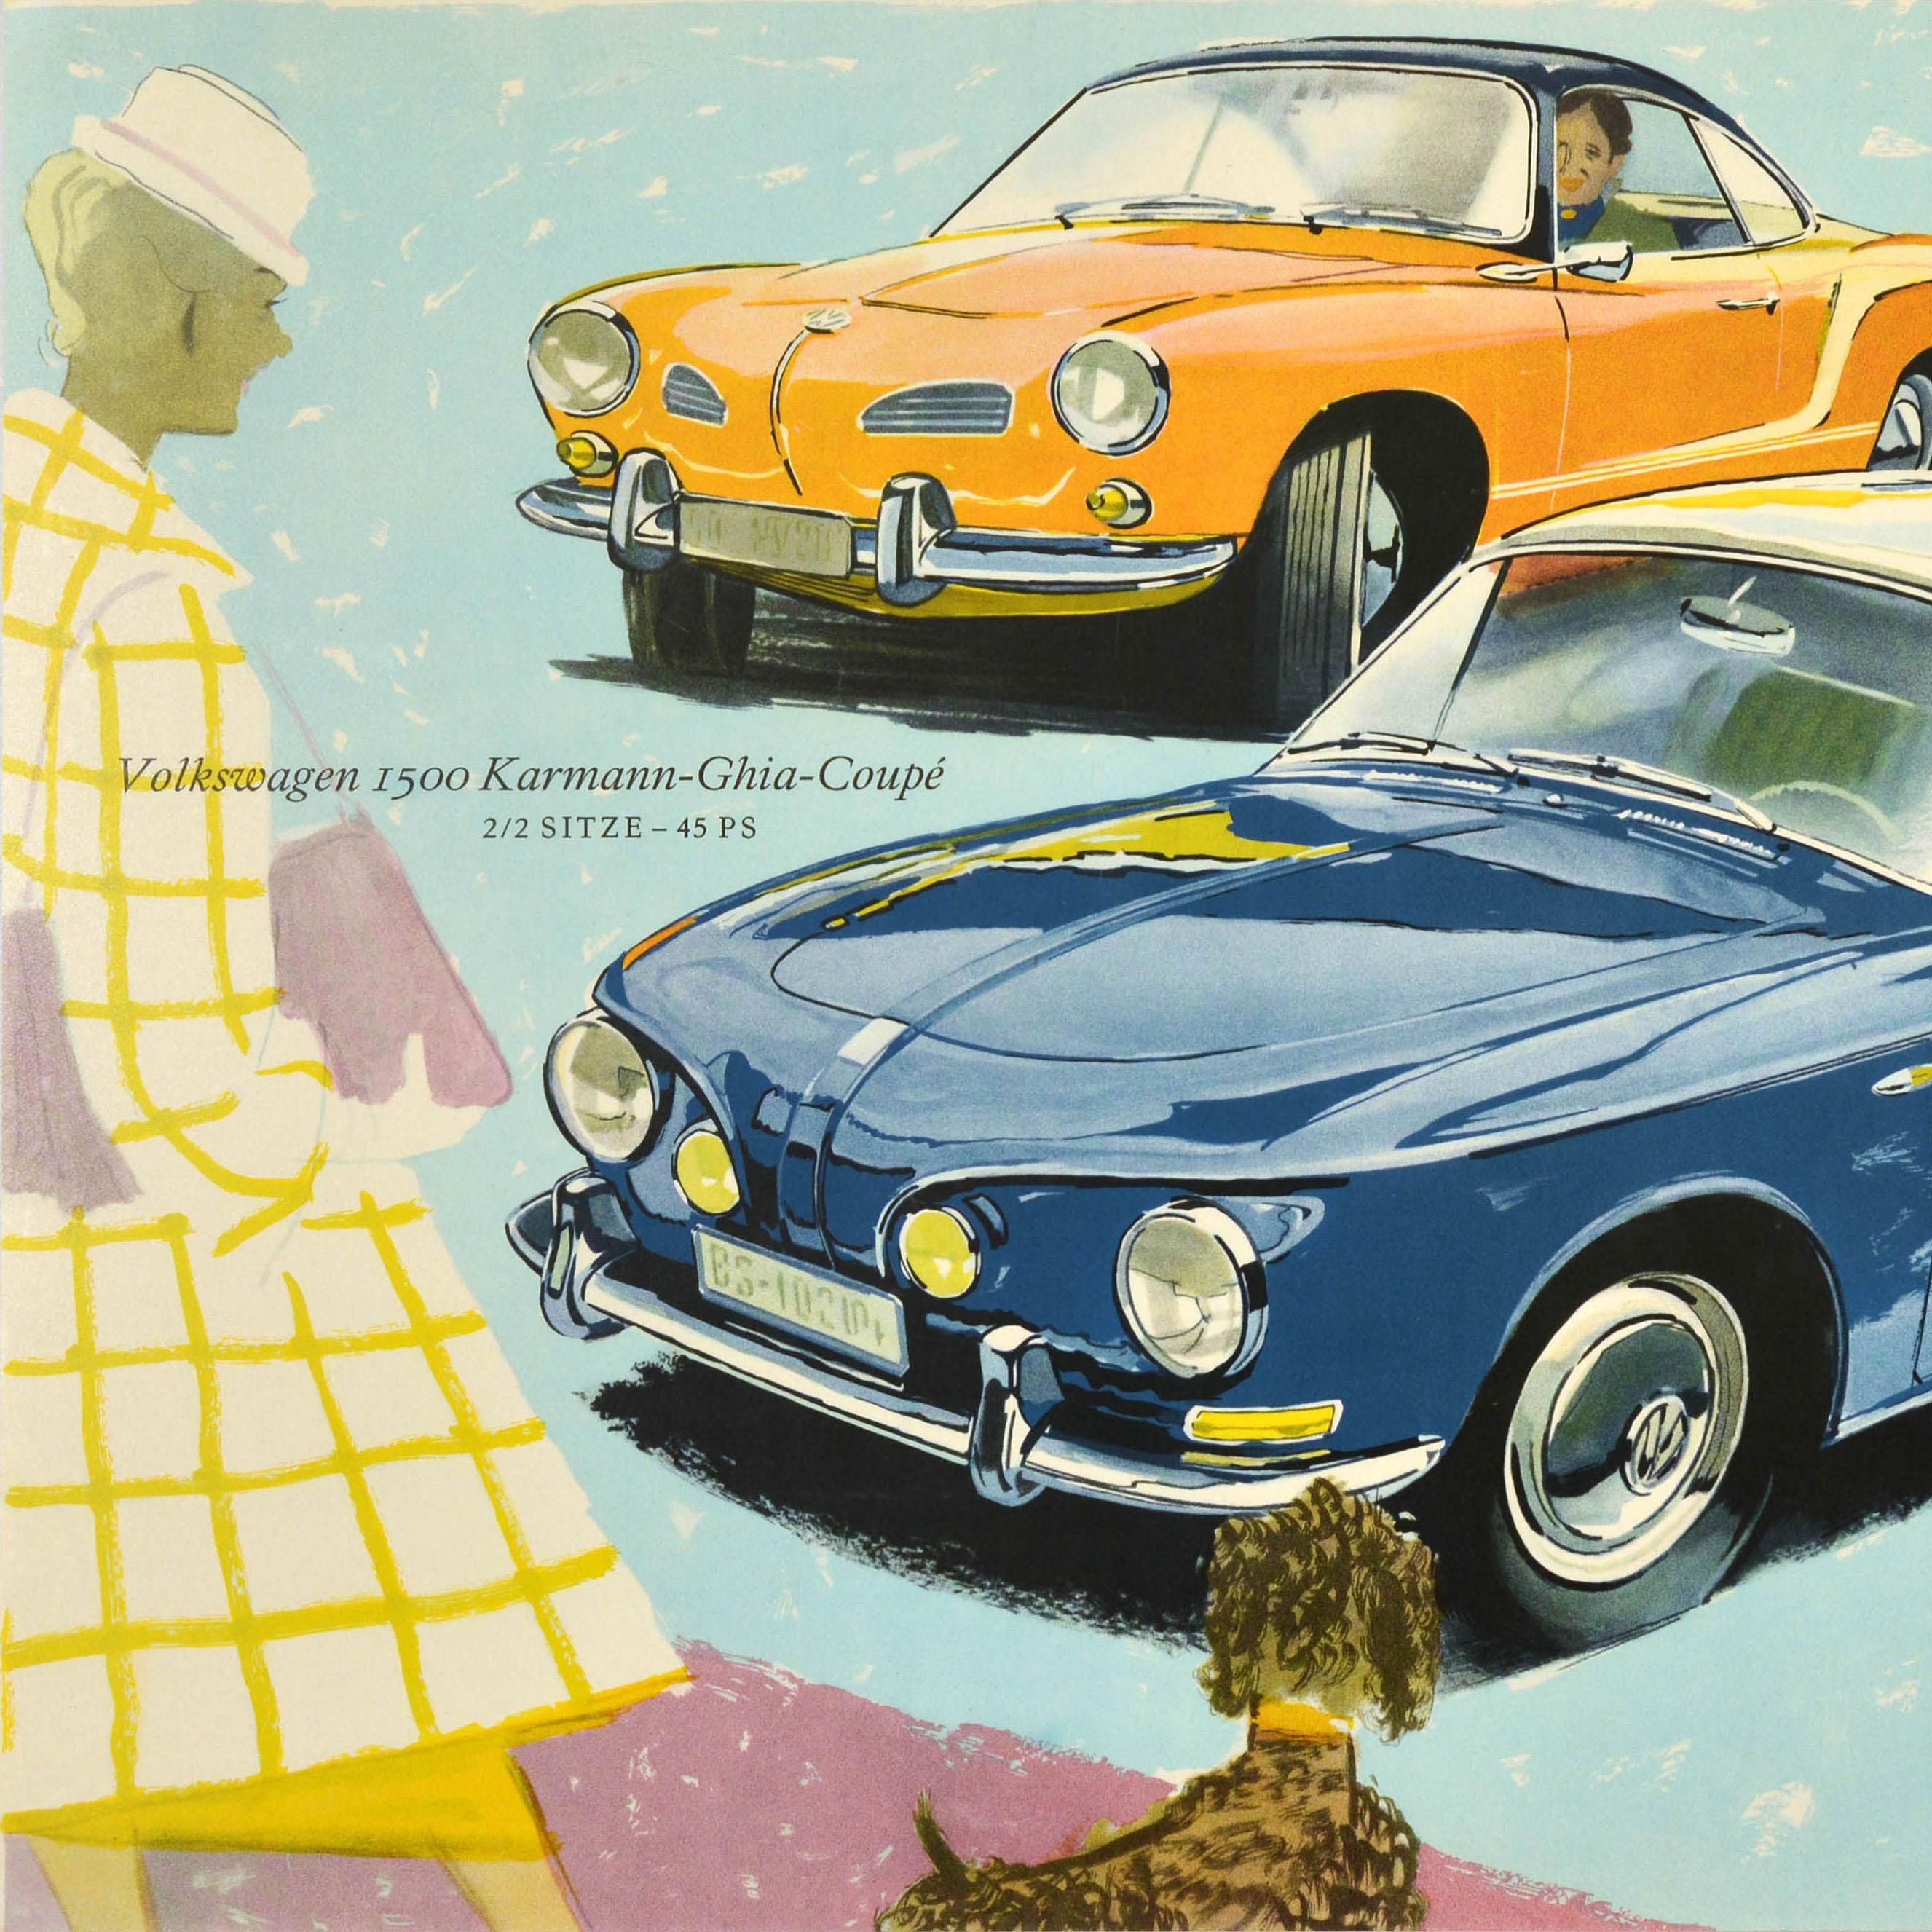 Original vintage VW advertising poster for Volkswagen Karmann Ghia cars featuring an illustration of an elegant lady with a dog looking at smiling drivers in two sporty cars, the VW logo on the side below and description in German next to each